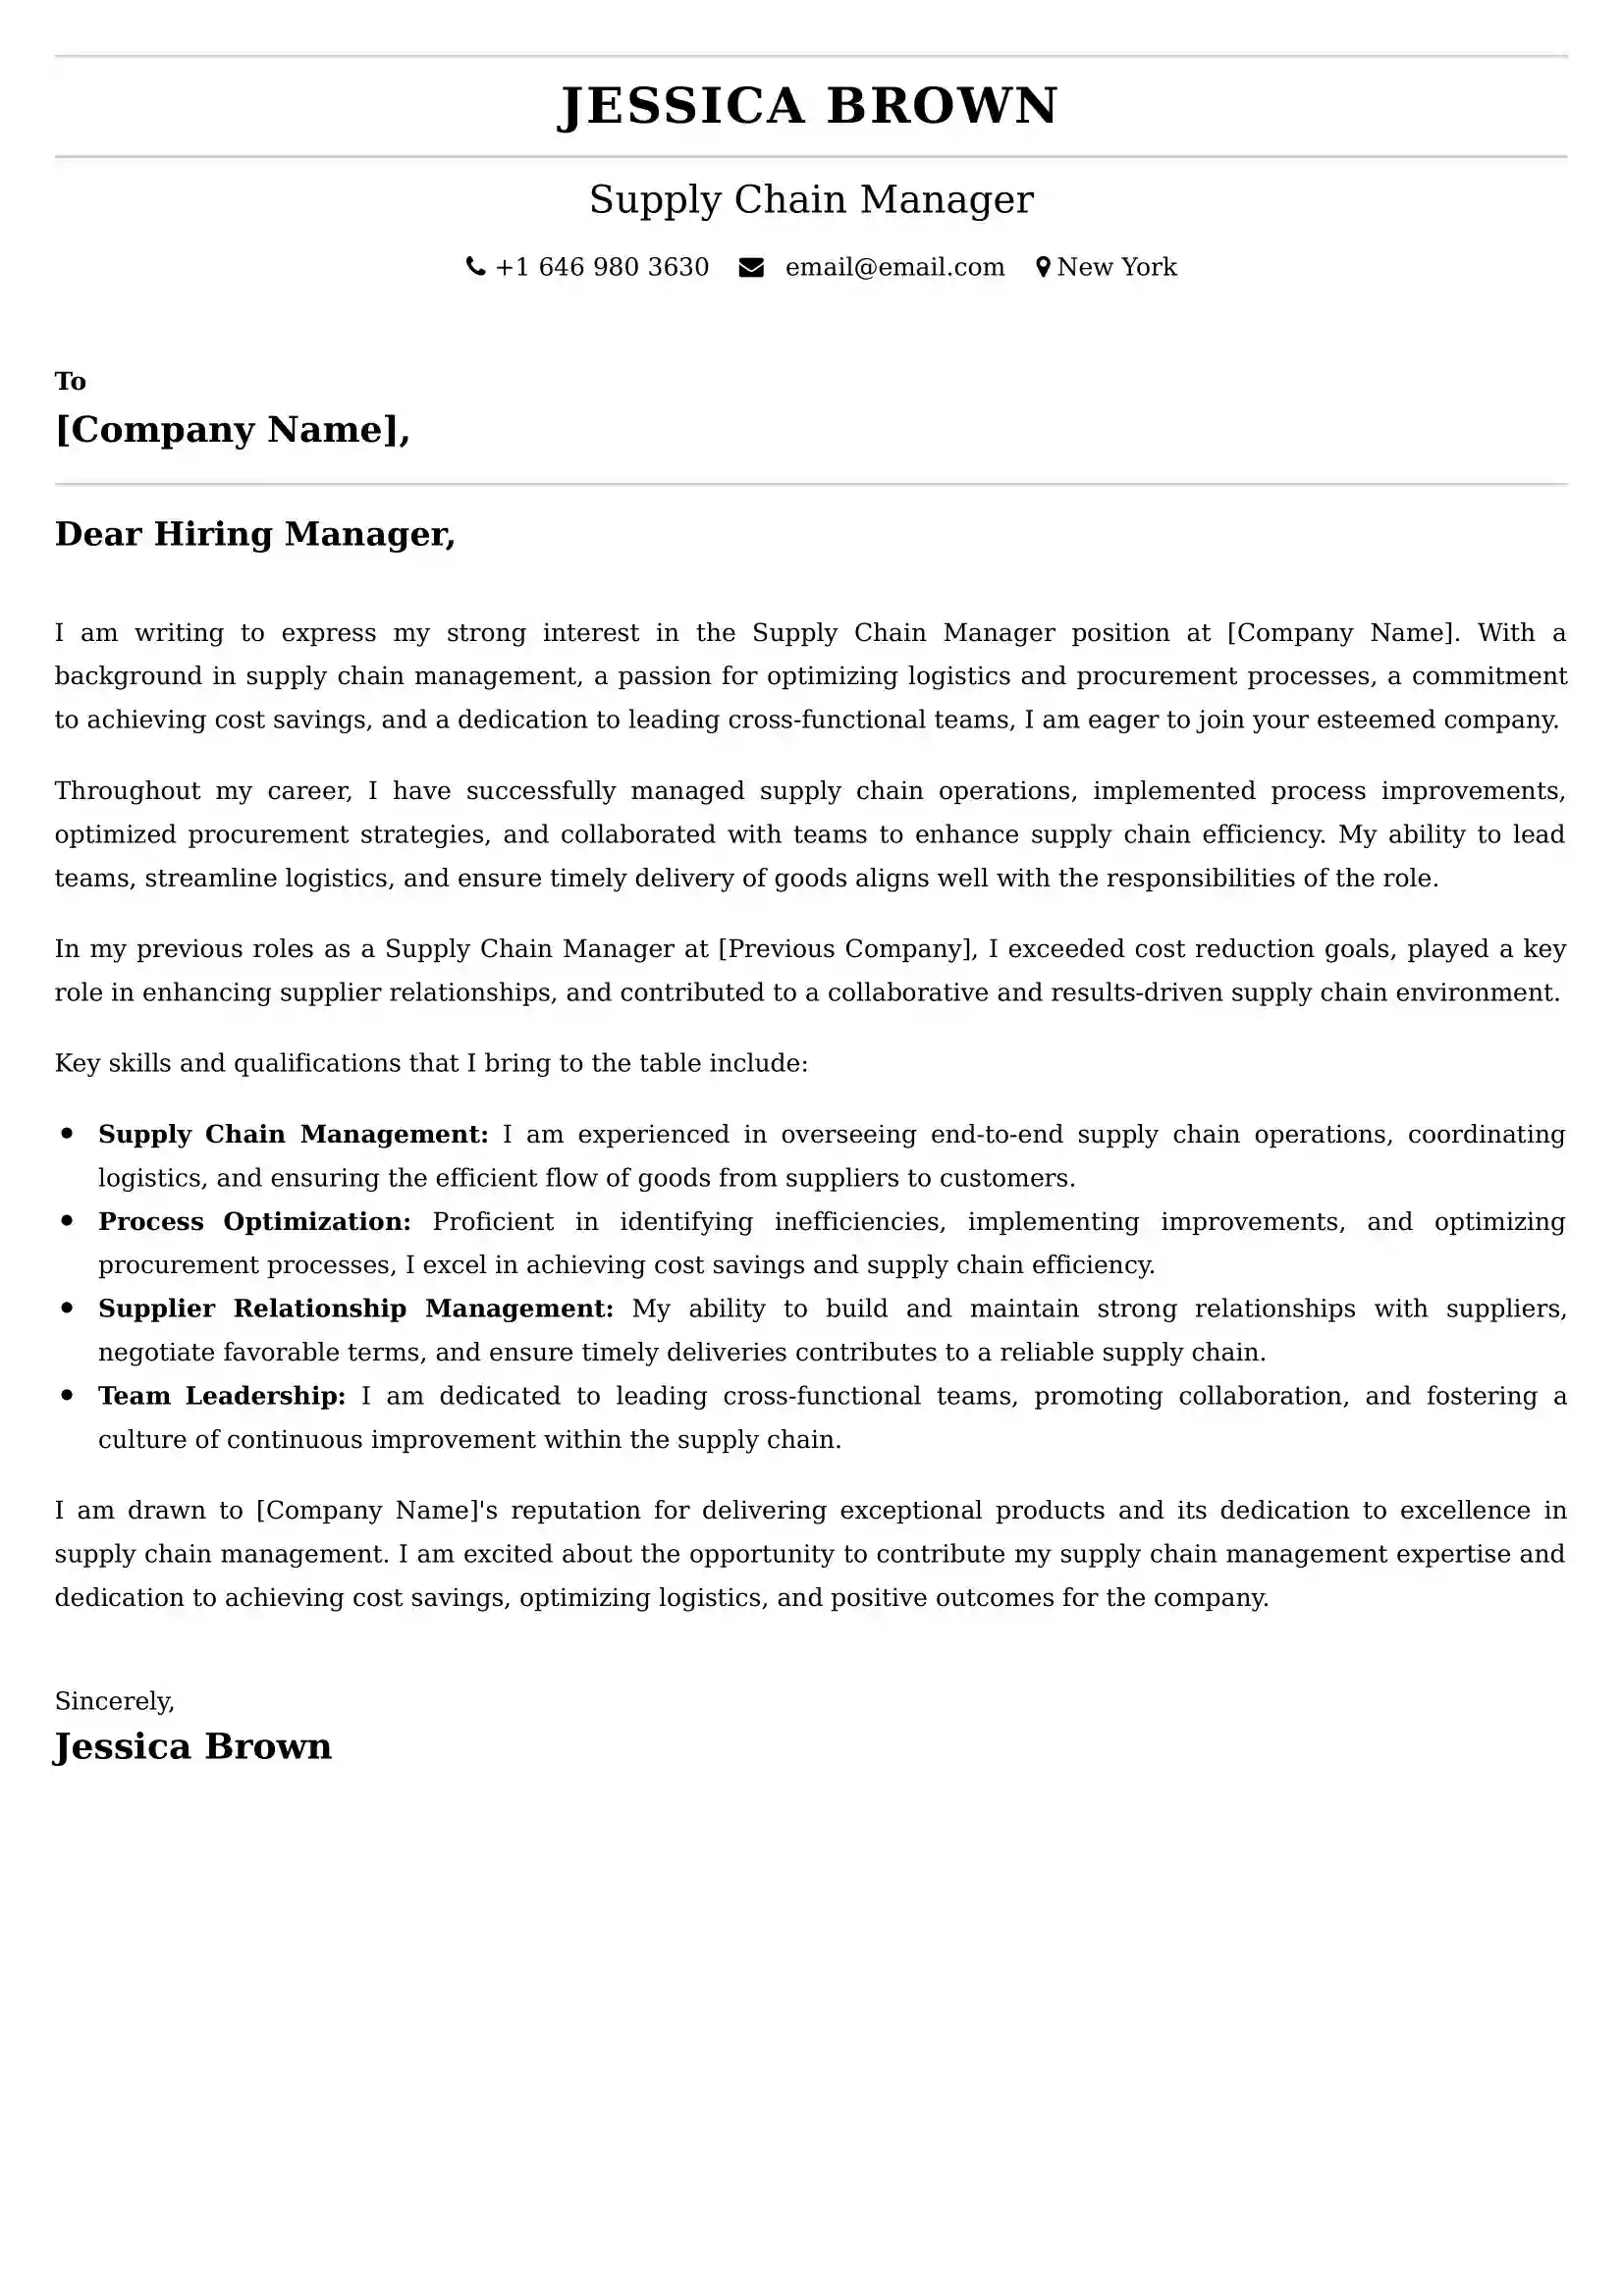 Supply Chain Manager Cover Letter Sample